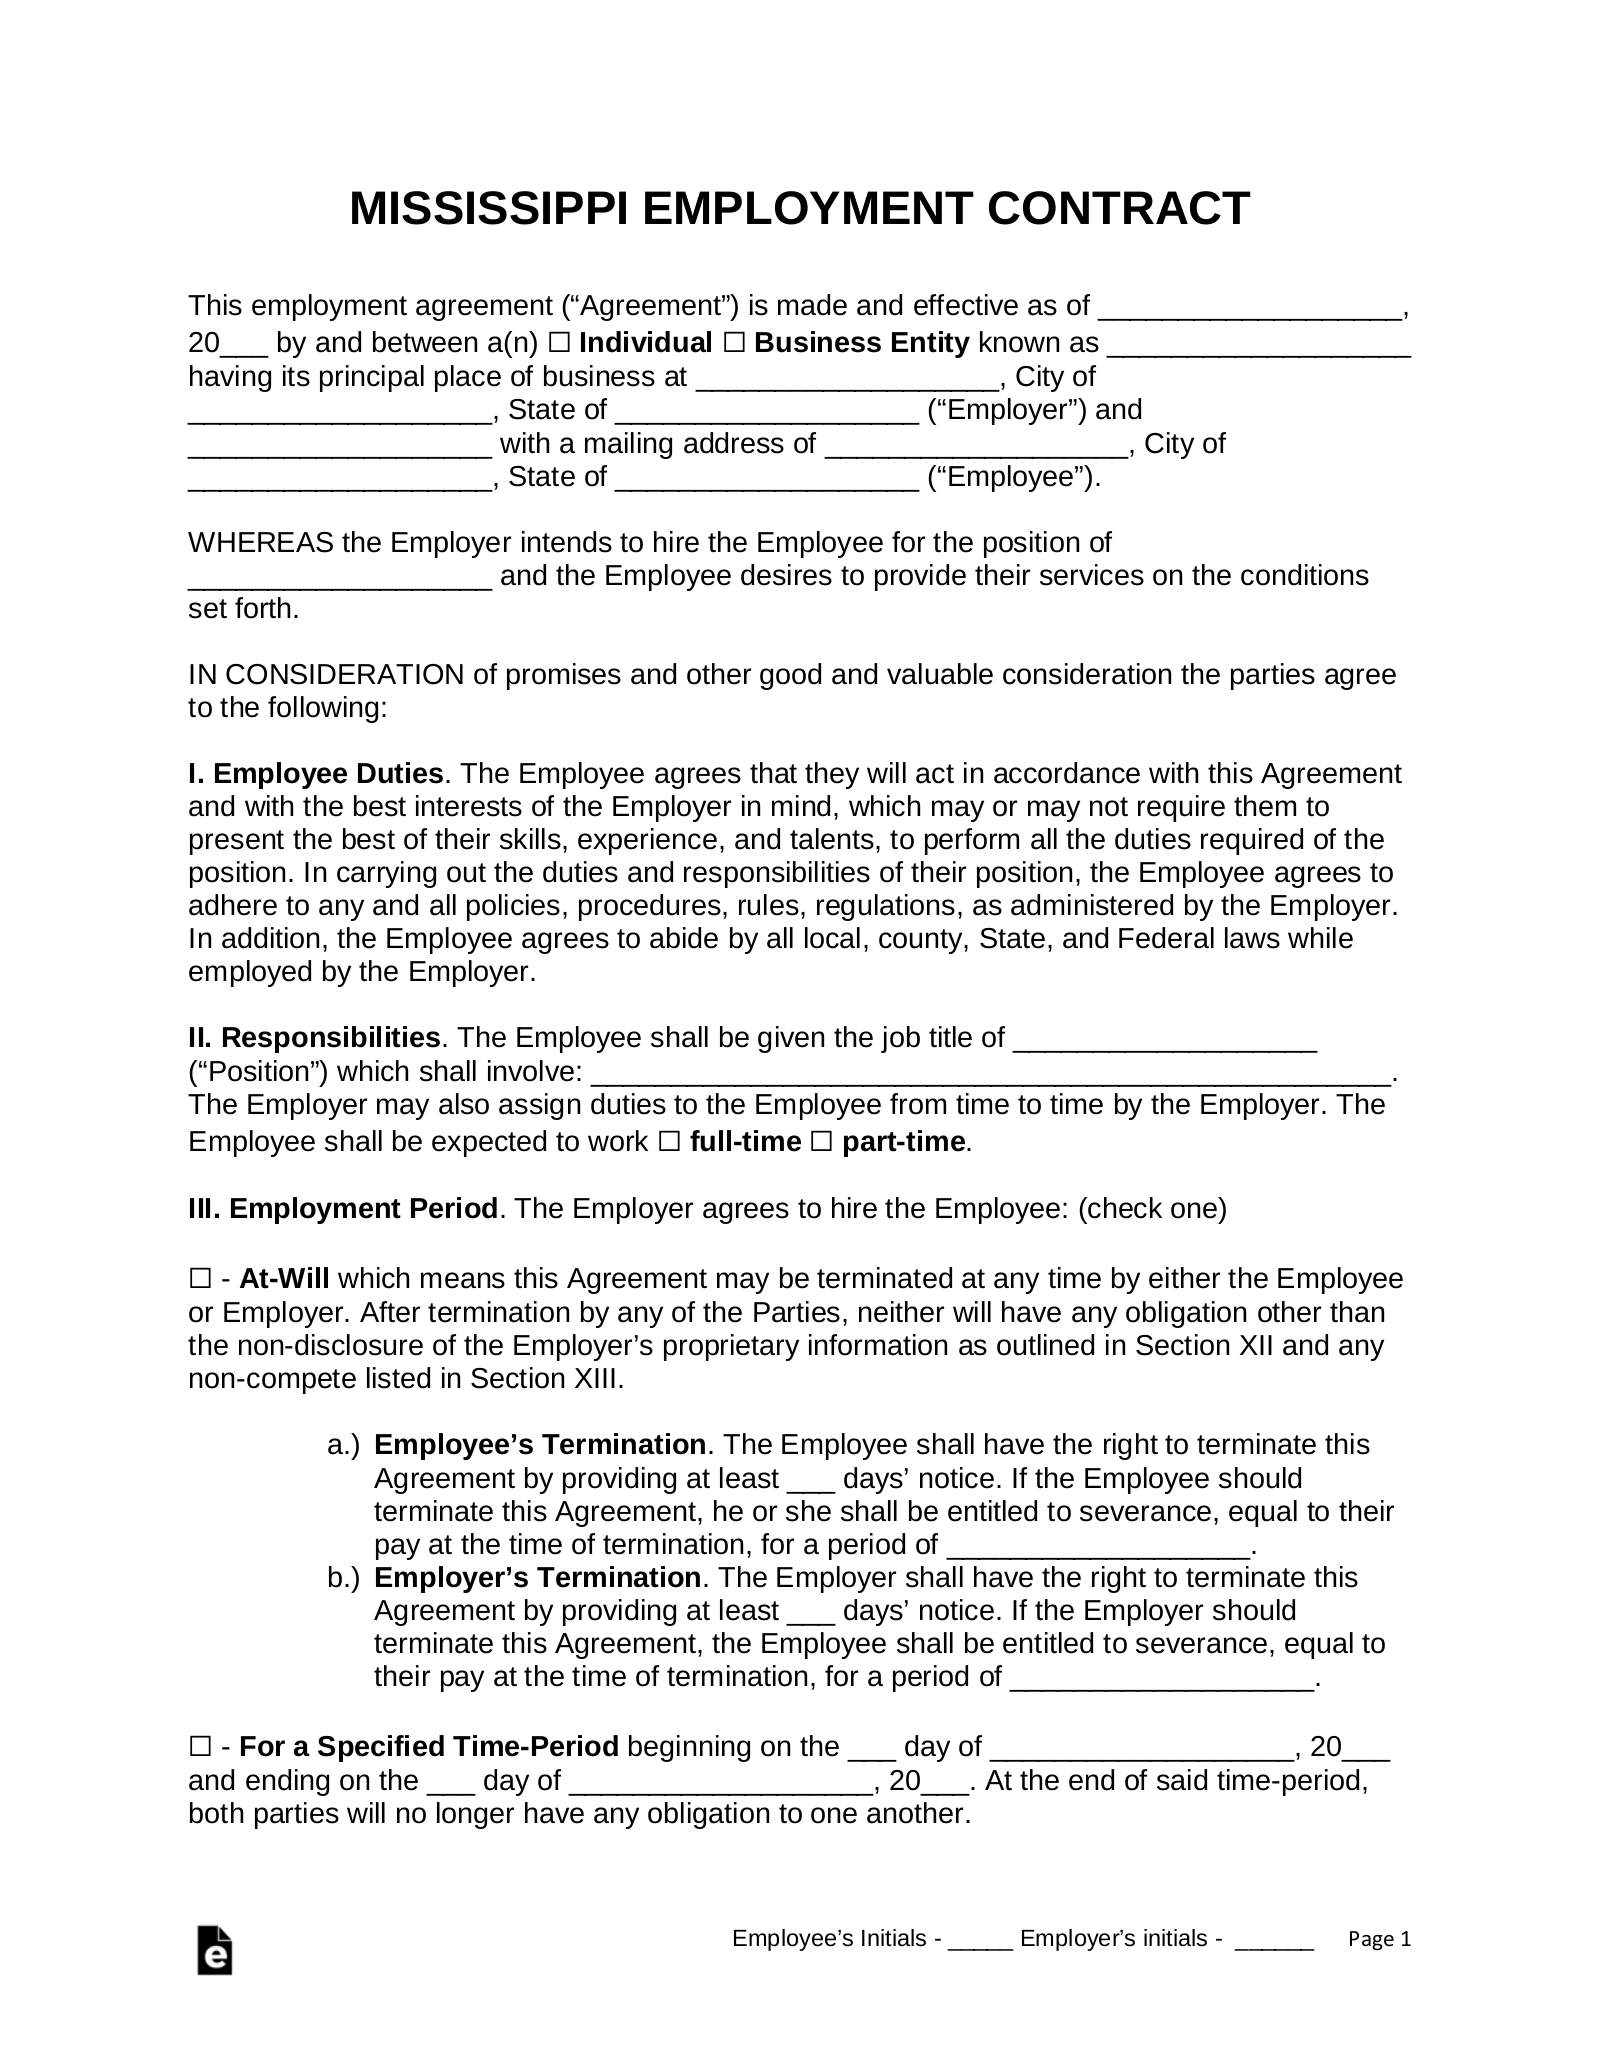 Mississippi Employment Contract Templates (4)